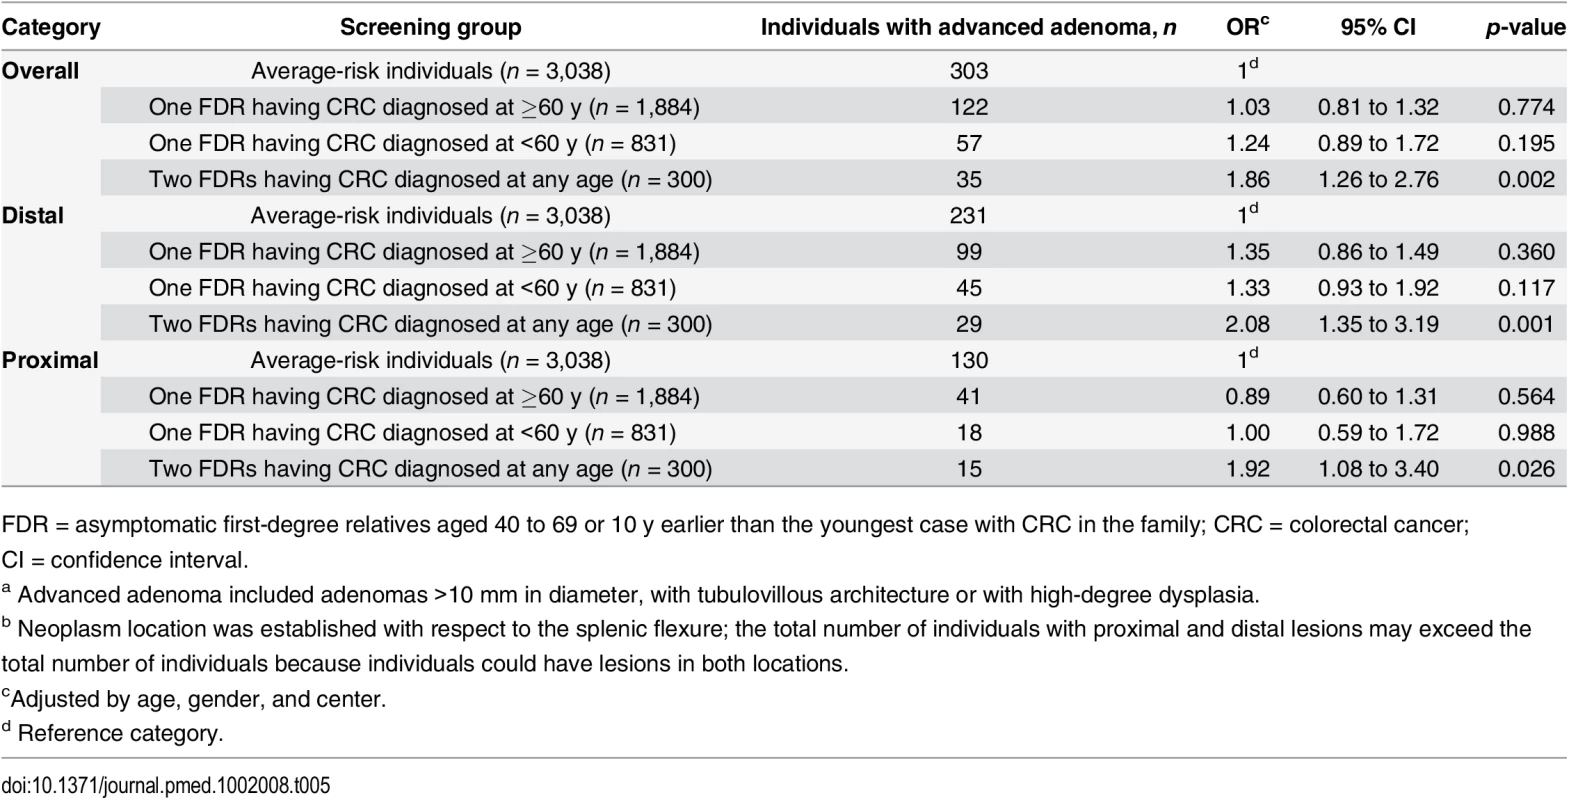 Risk of advanced adenoma<em class=&quot;ref&quot;><sup>a</sup></em> stratified by location of lesion<em class=&quot;ref&quot;><sup>b</sup></em>.